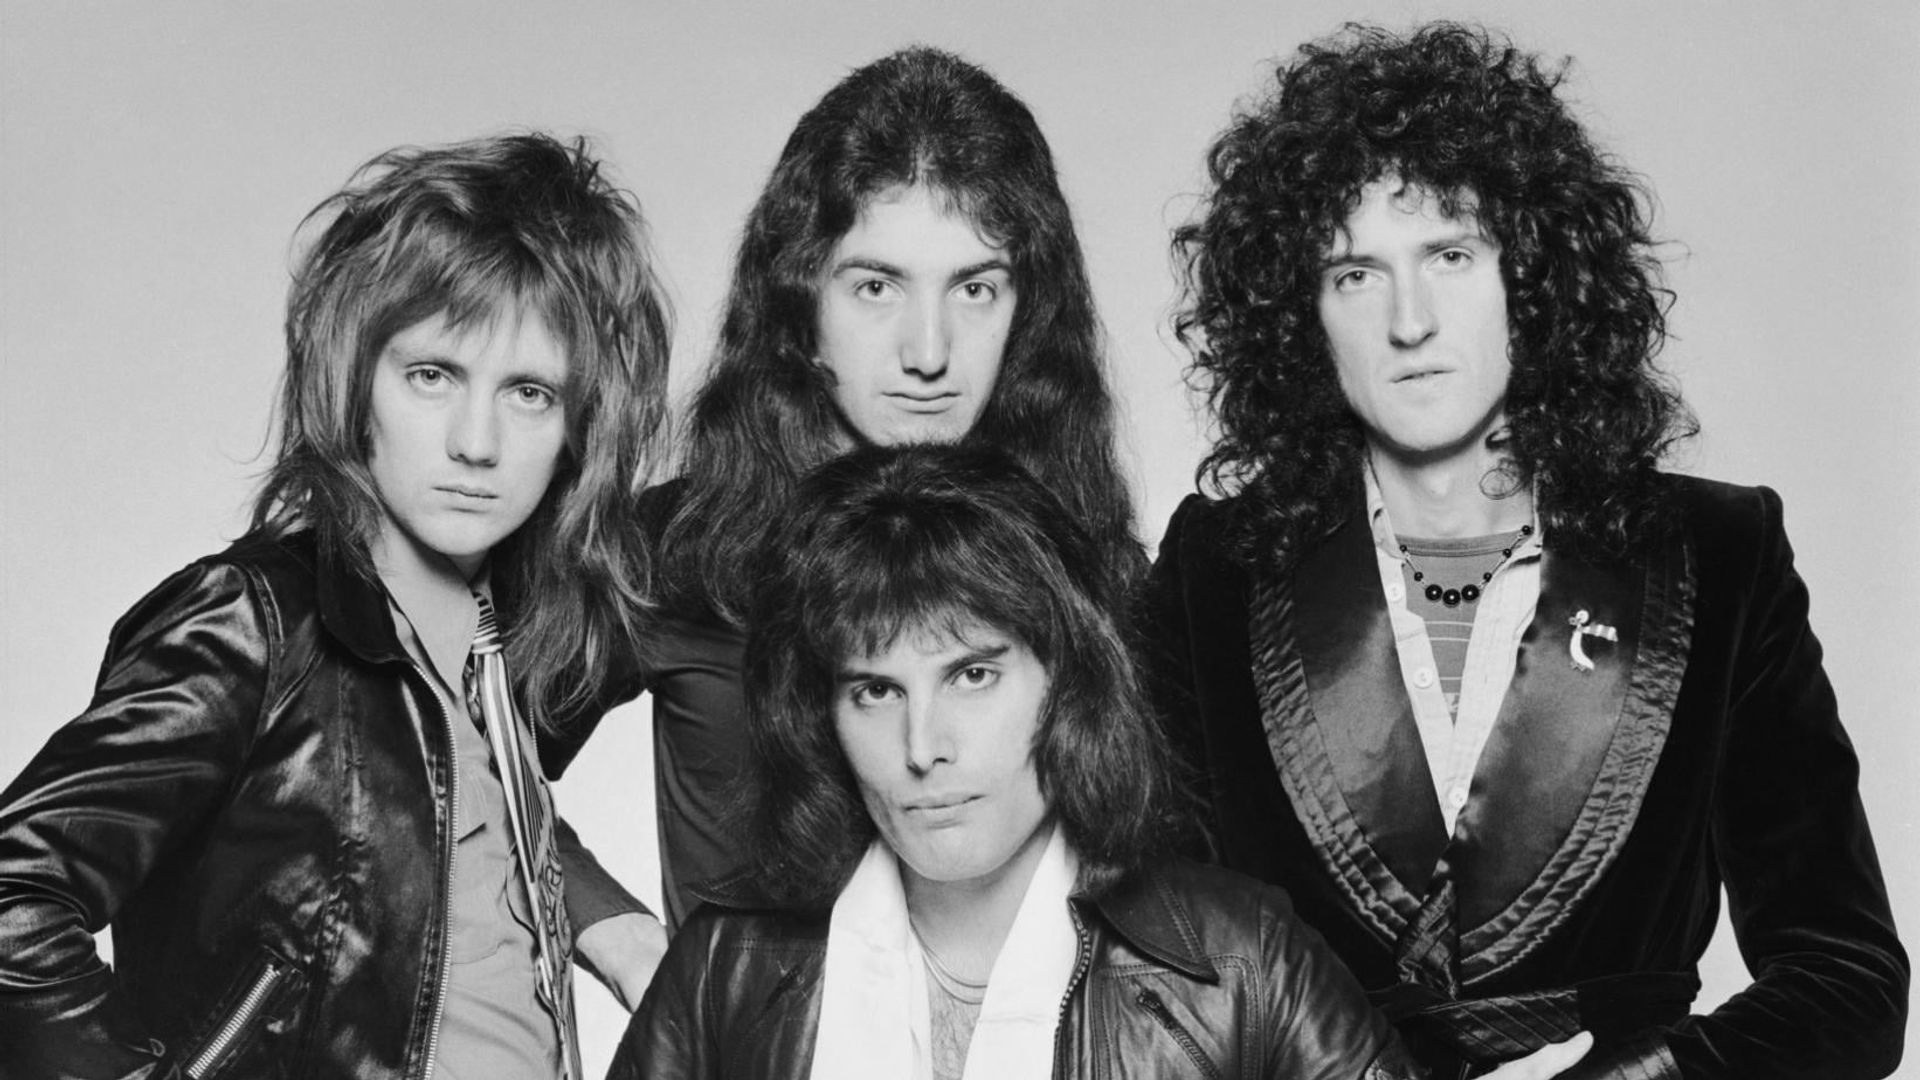 Queen: A Night at the Opera Backdrop